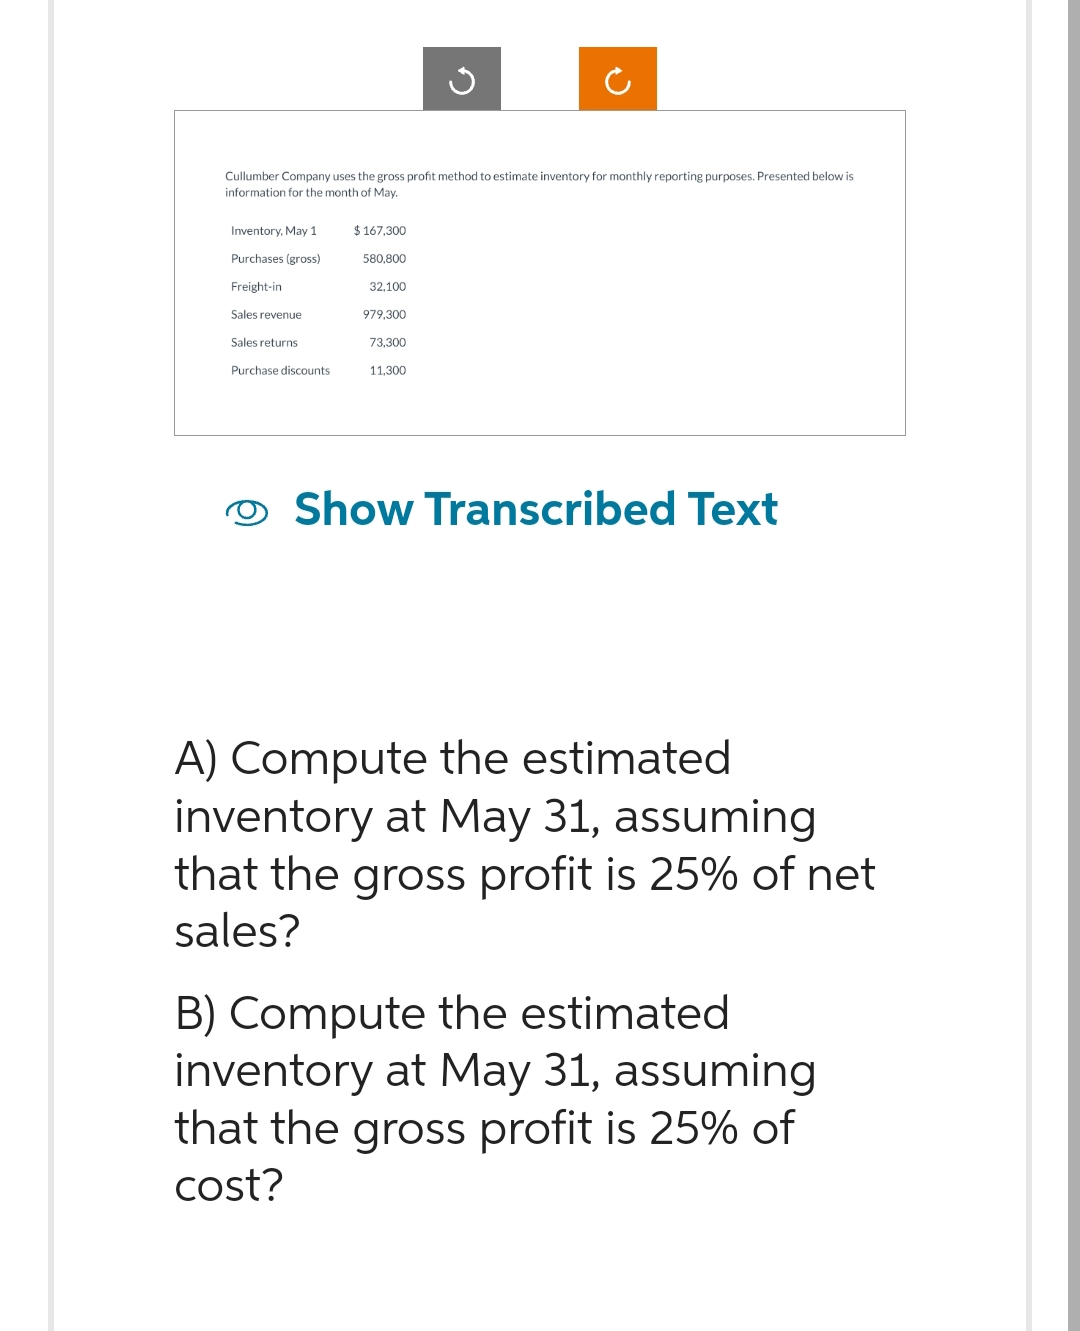 Cullumber Company uses the gross profit method to estimate inventory for monthly reporting purposes. Presented below is
information for the month of May.
Inventory, May 1
Purchases (gross)
Freight-in
Sales revenue
Sales returns
Purchase discounts
$167.300
580.800
32,100
979,300
73,300
11.300
Show Transcribed Text
A) Compute the estimated
inventory at May 31, assuming
that the gross profit is 25% of net
sales?
B) Compute the estimated
inventory at May 31, assuming
that the gross profit is 25% of
cost?